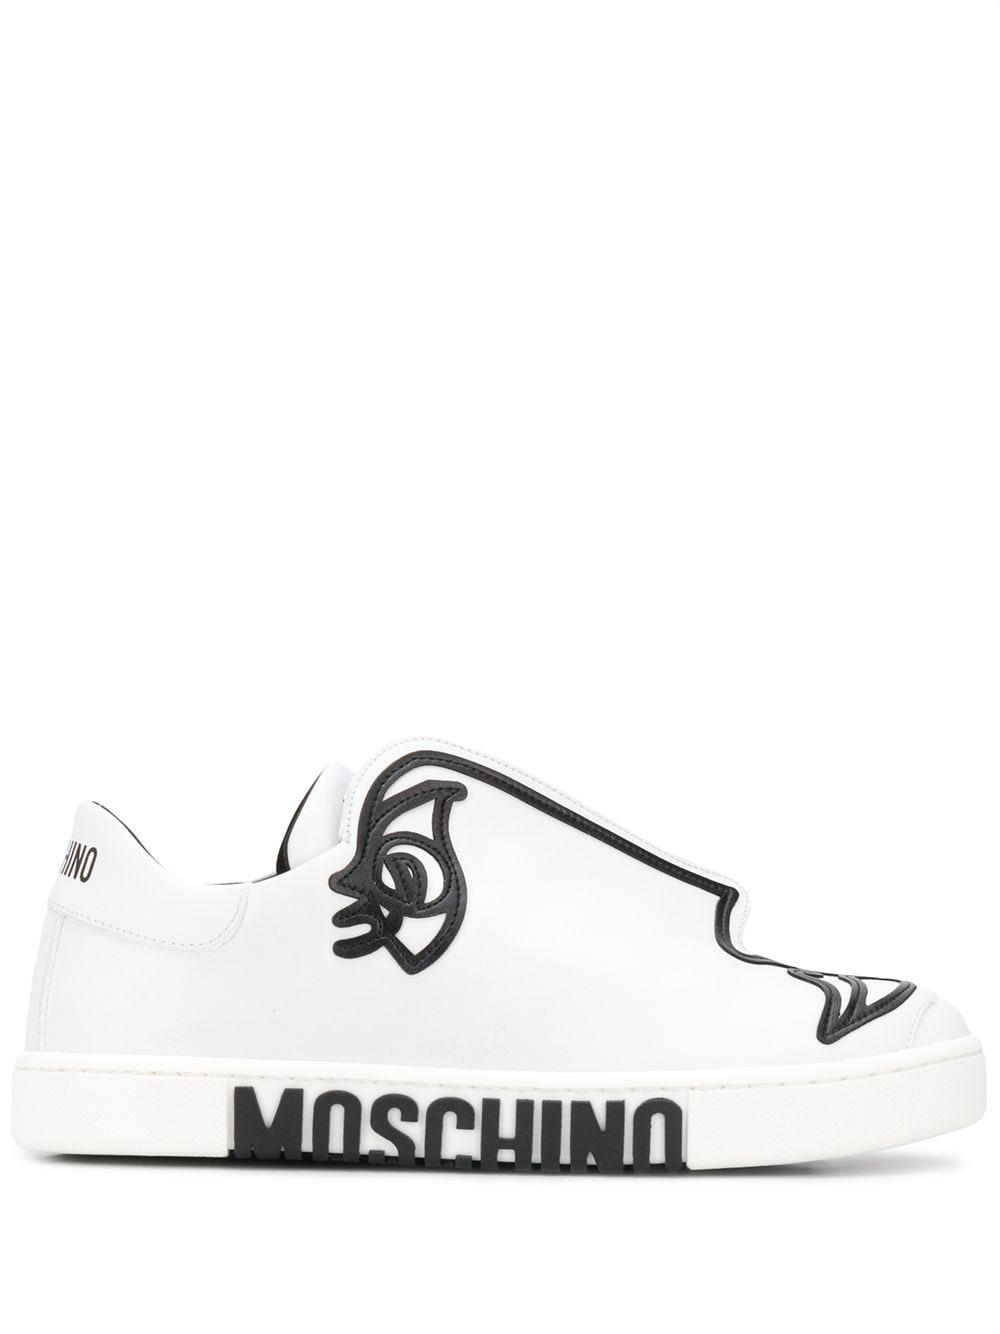 Moschino Leather Face-detail Low-top Sneakers in Lyst